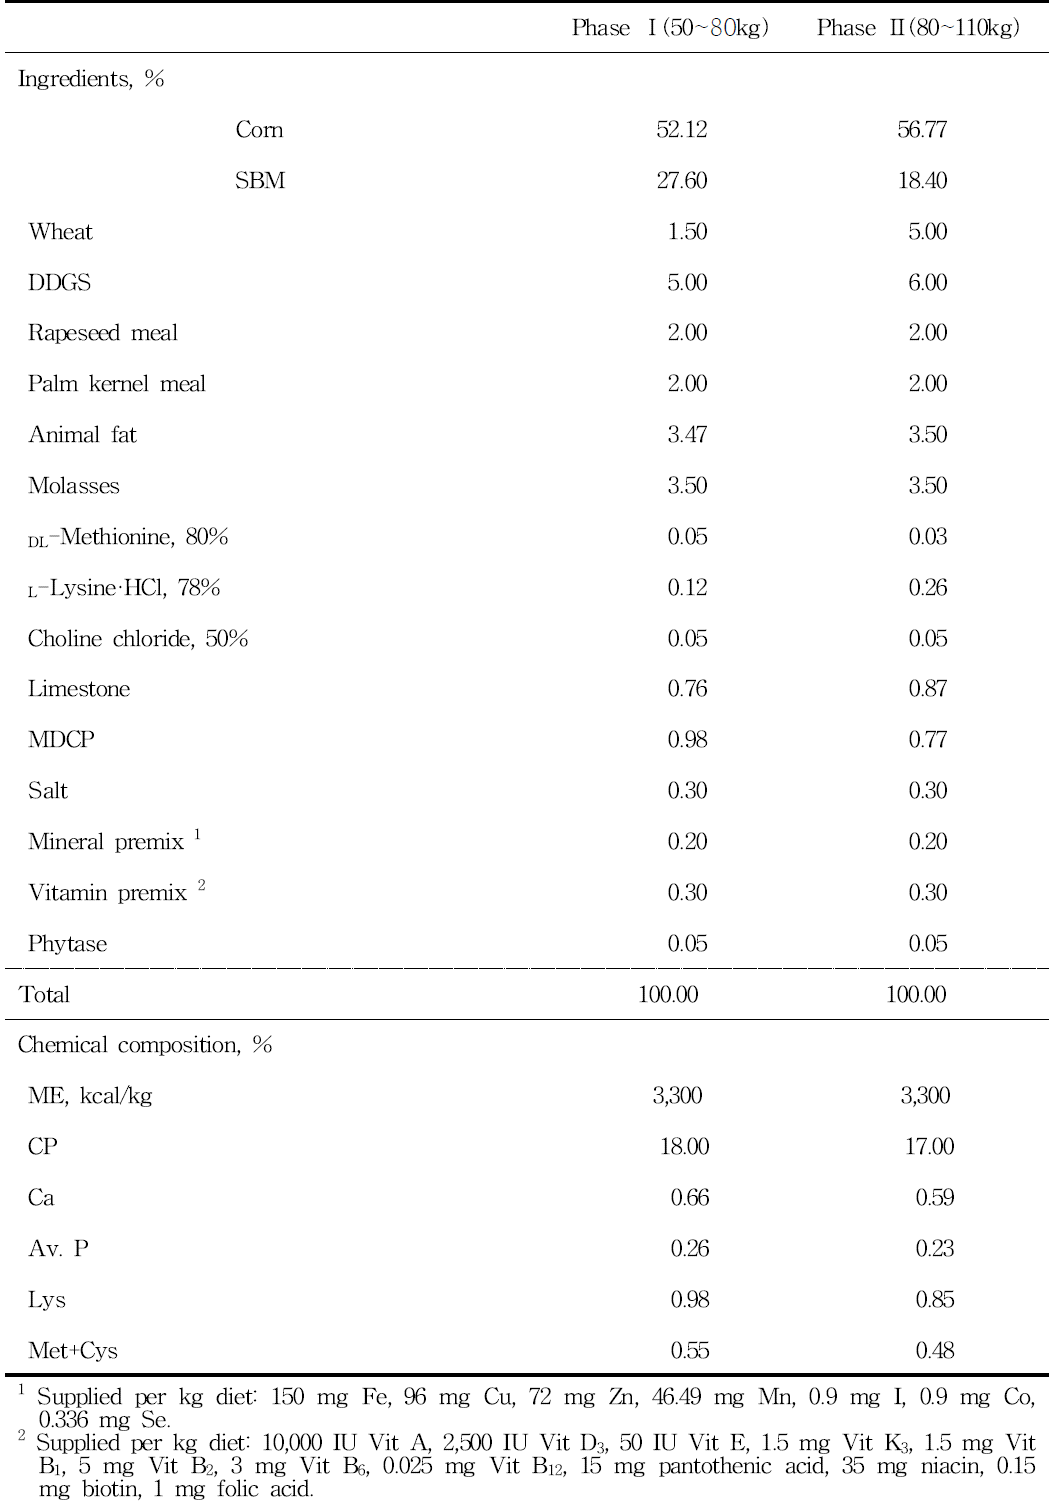 Formula and chemical composition of experimental diets (as-fed basis)